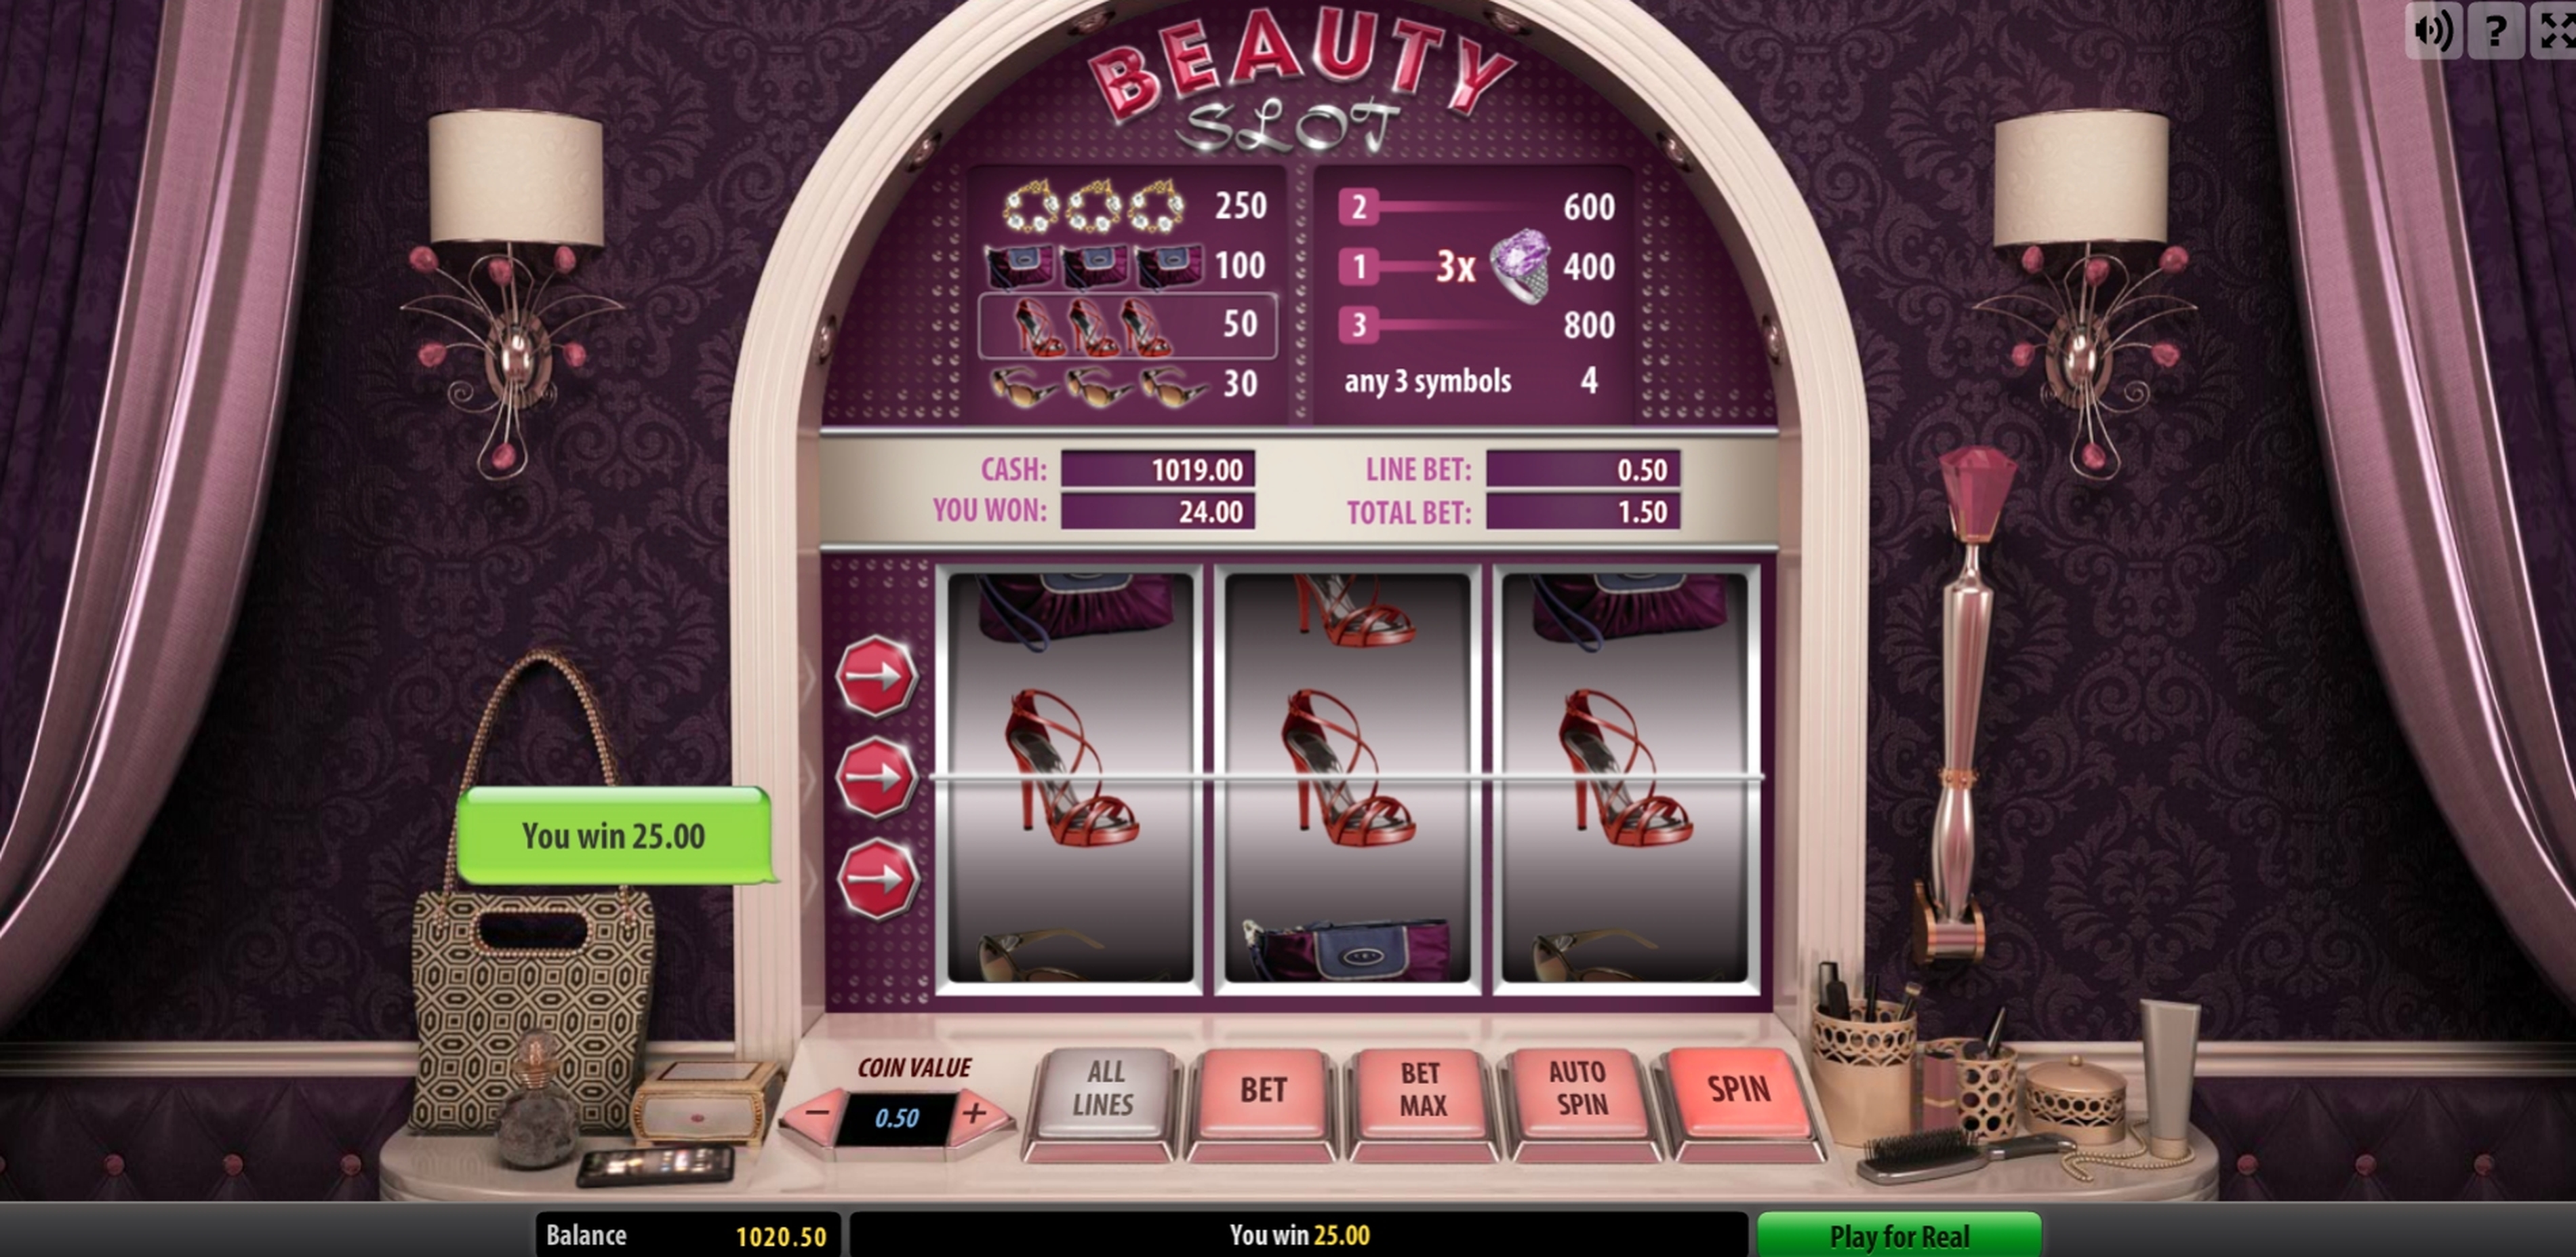 Win Money in Beauty Slot Free Slot Game by Fugaso